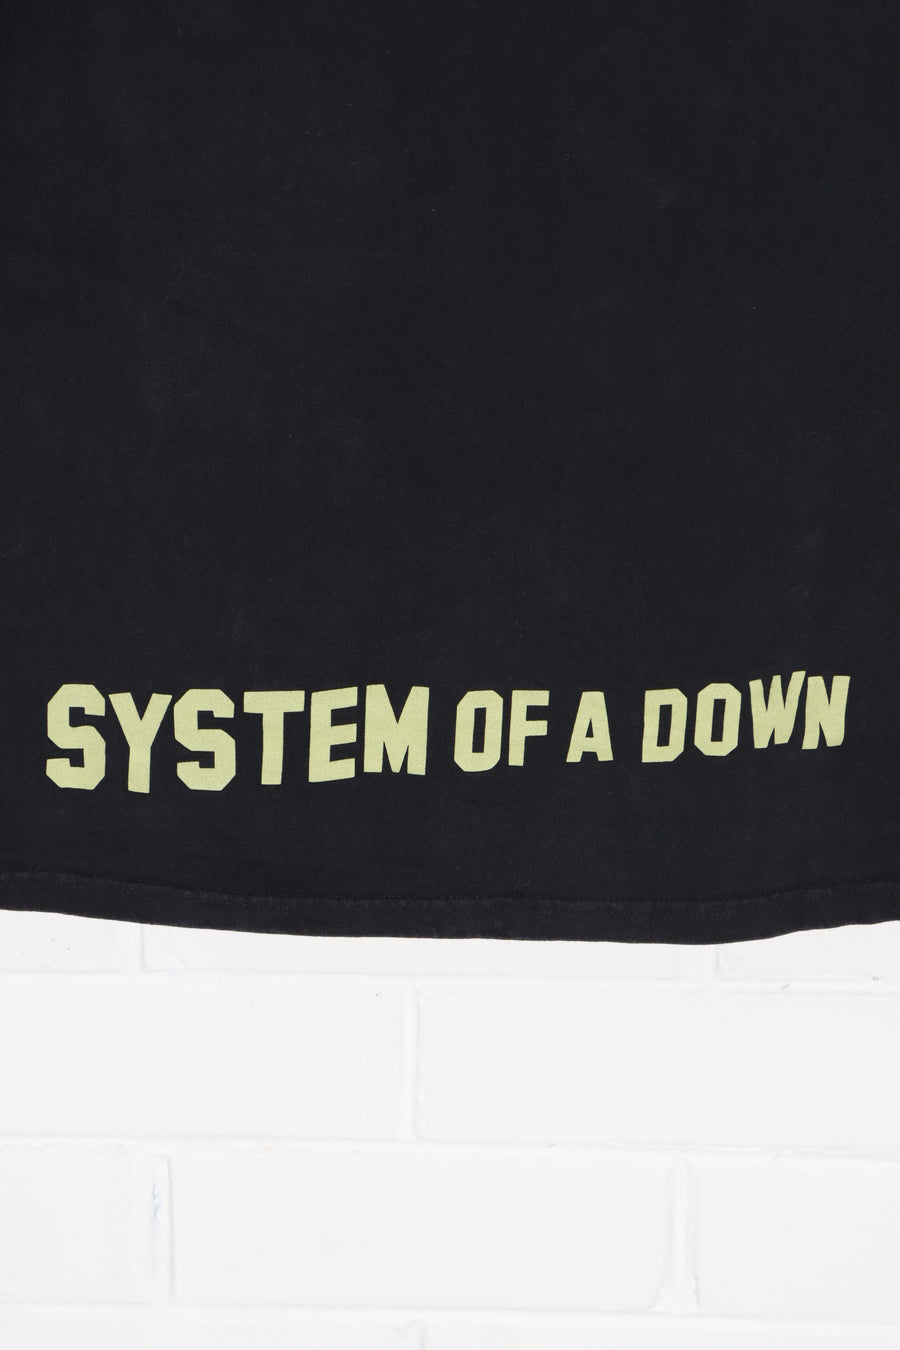 System Of A Down 2001 Band Front Back T-Shirt (XL)